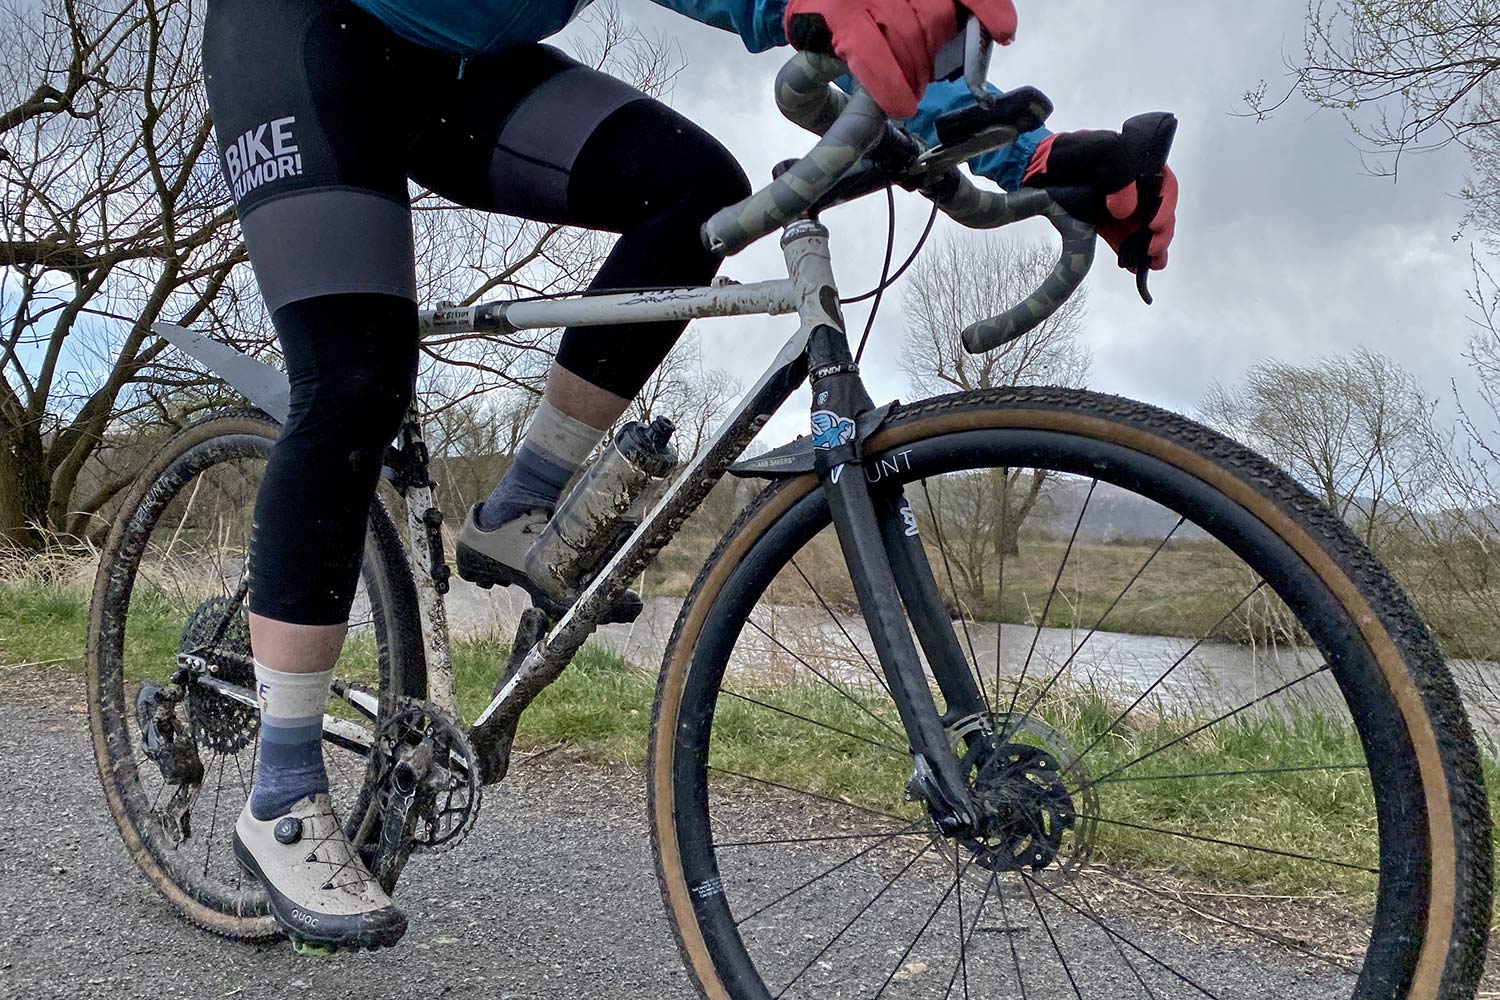 Quoc Gran Tourer II gravel bike shoes updated with dial retention, review cold & wet riding